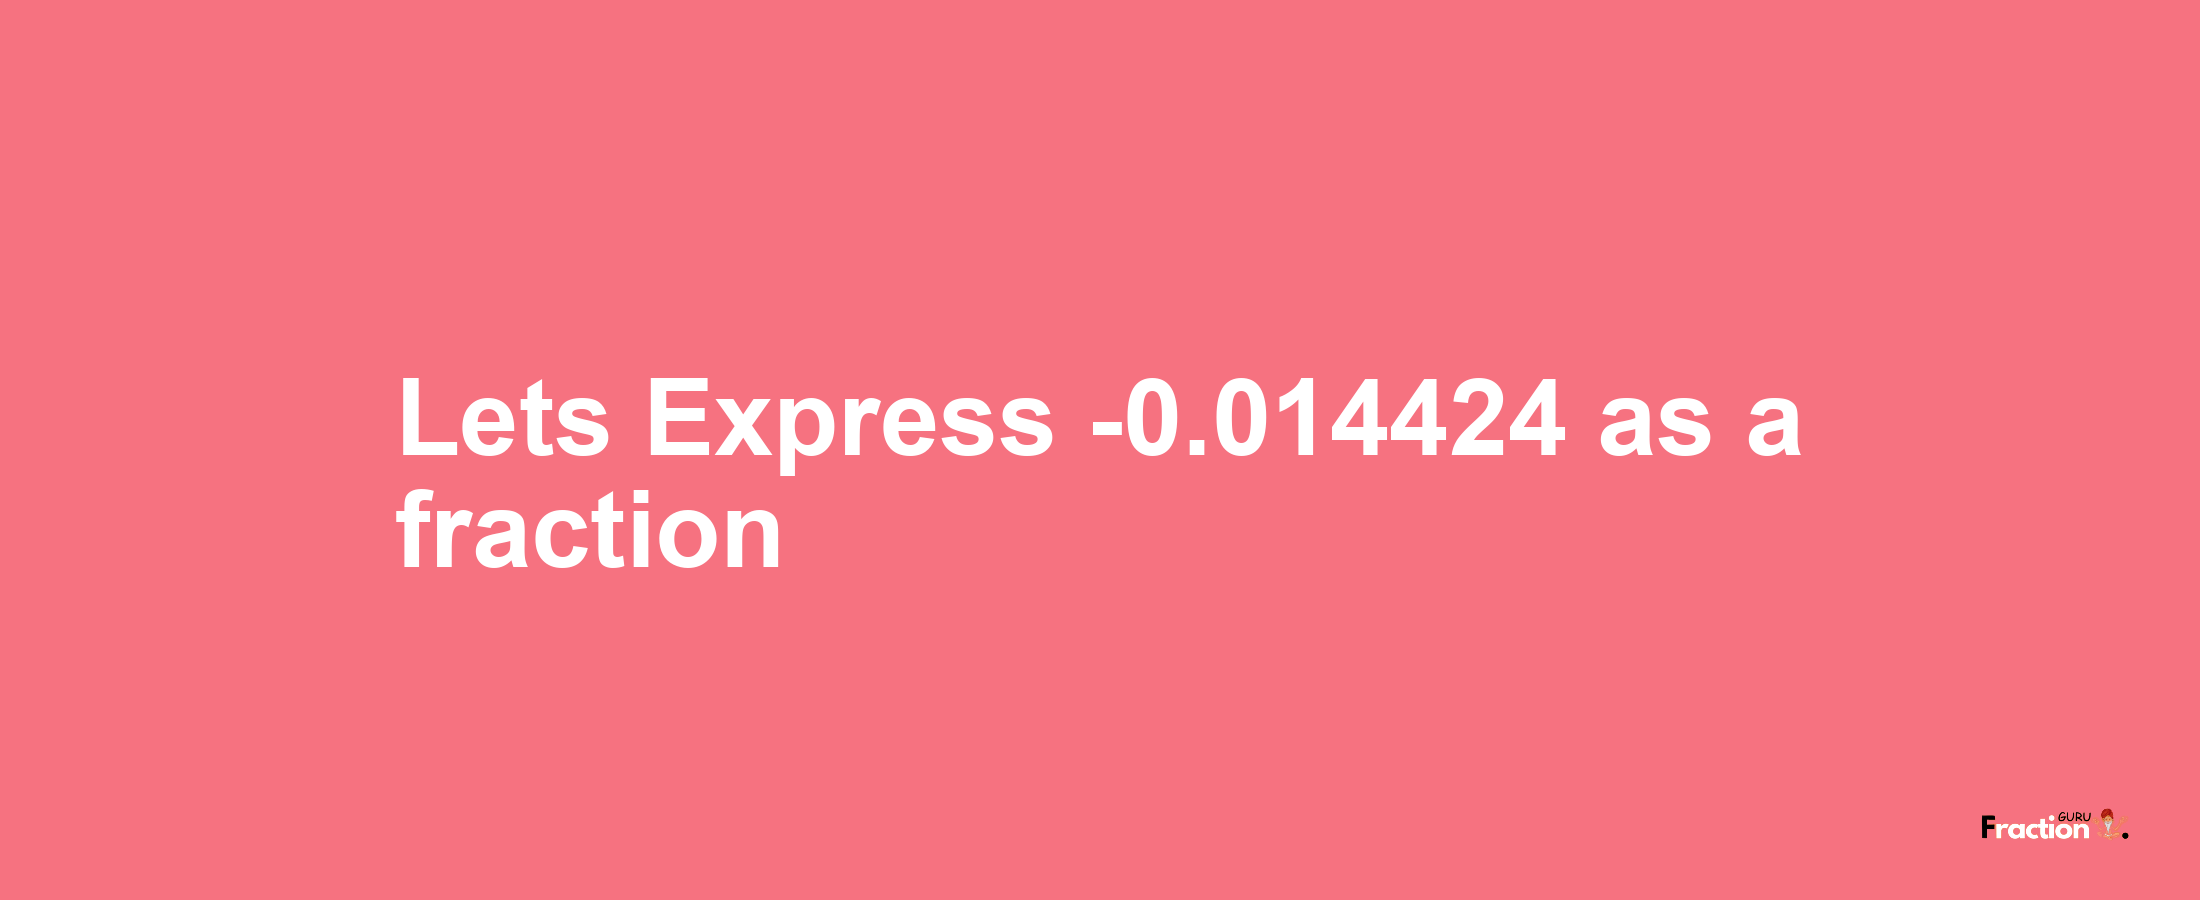 Lets Express -0.014424 as afraction